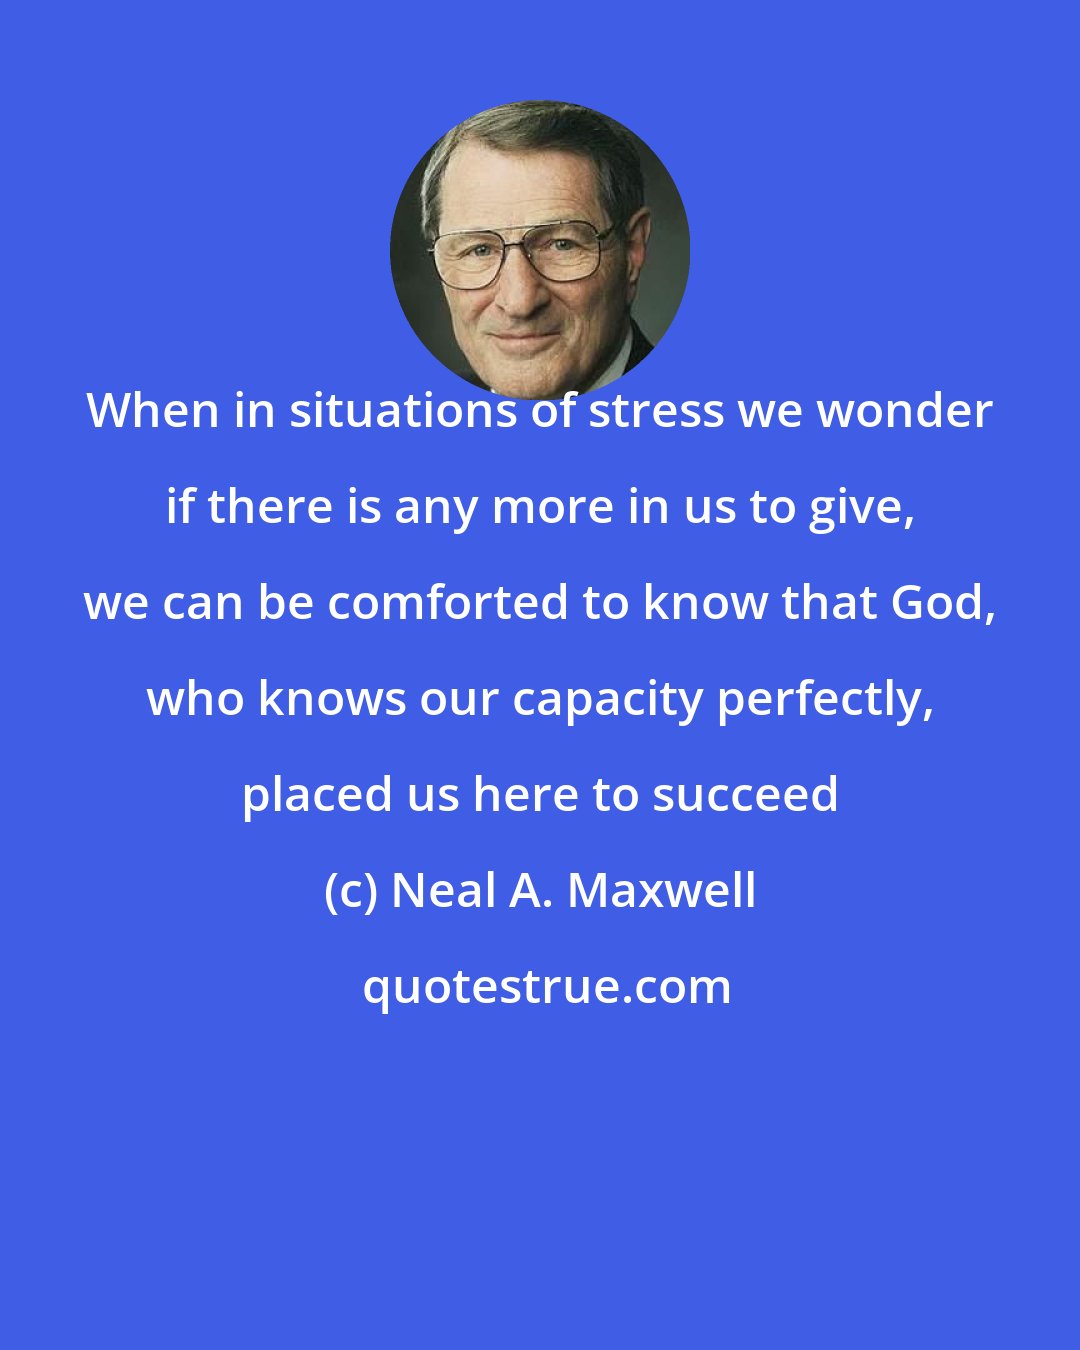 Neal A. Maxwell: When in situations of stress we wonder if there is any more in us to give, we can be comforted to know that God, who knows our capacity perfectly, placed us here to succeed